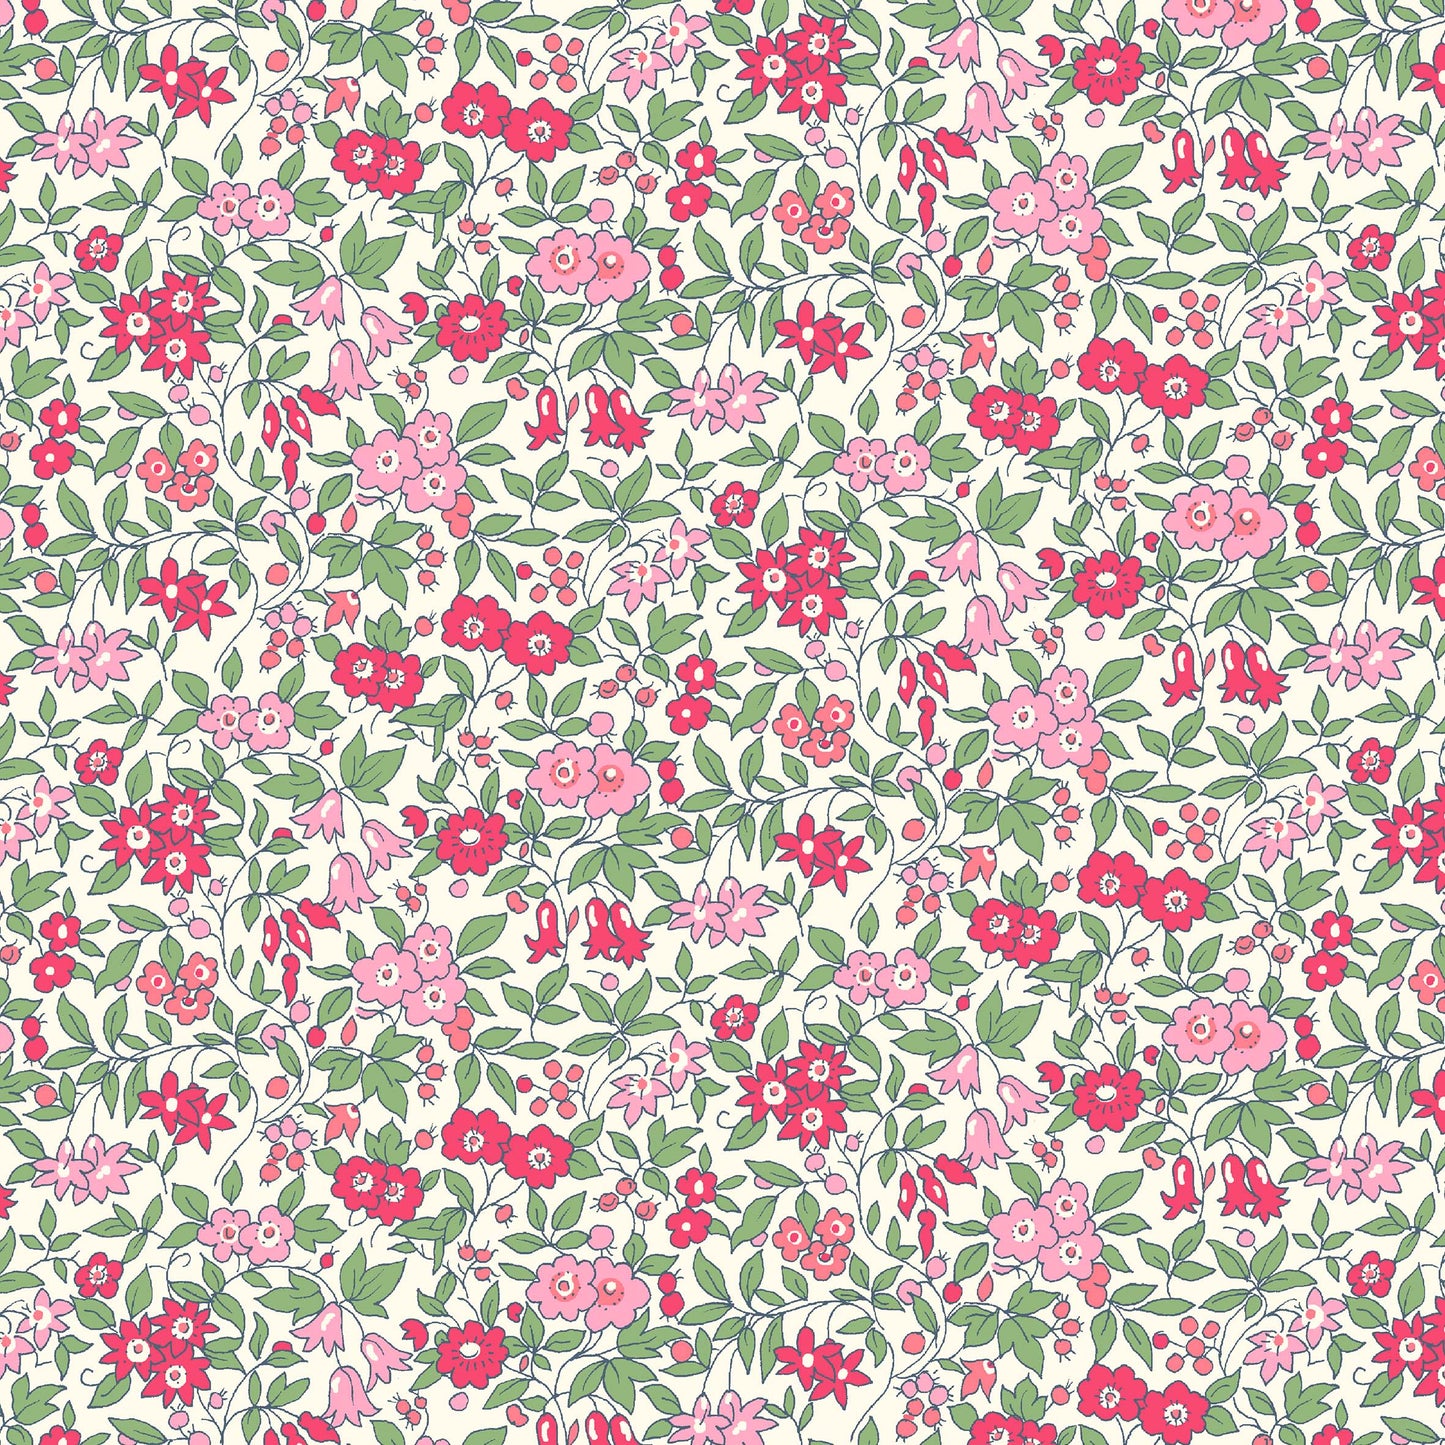 Forget Me Not Pink - Liberty - The Flower Show Midsummer Collection Cotton Fabric